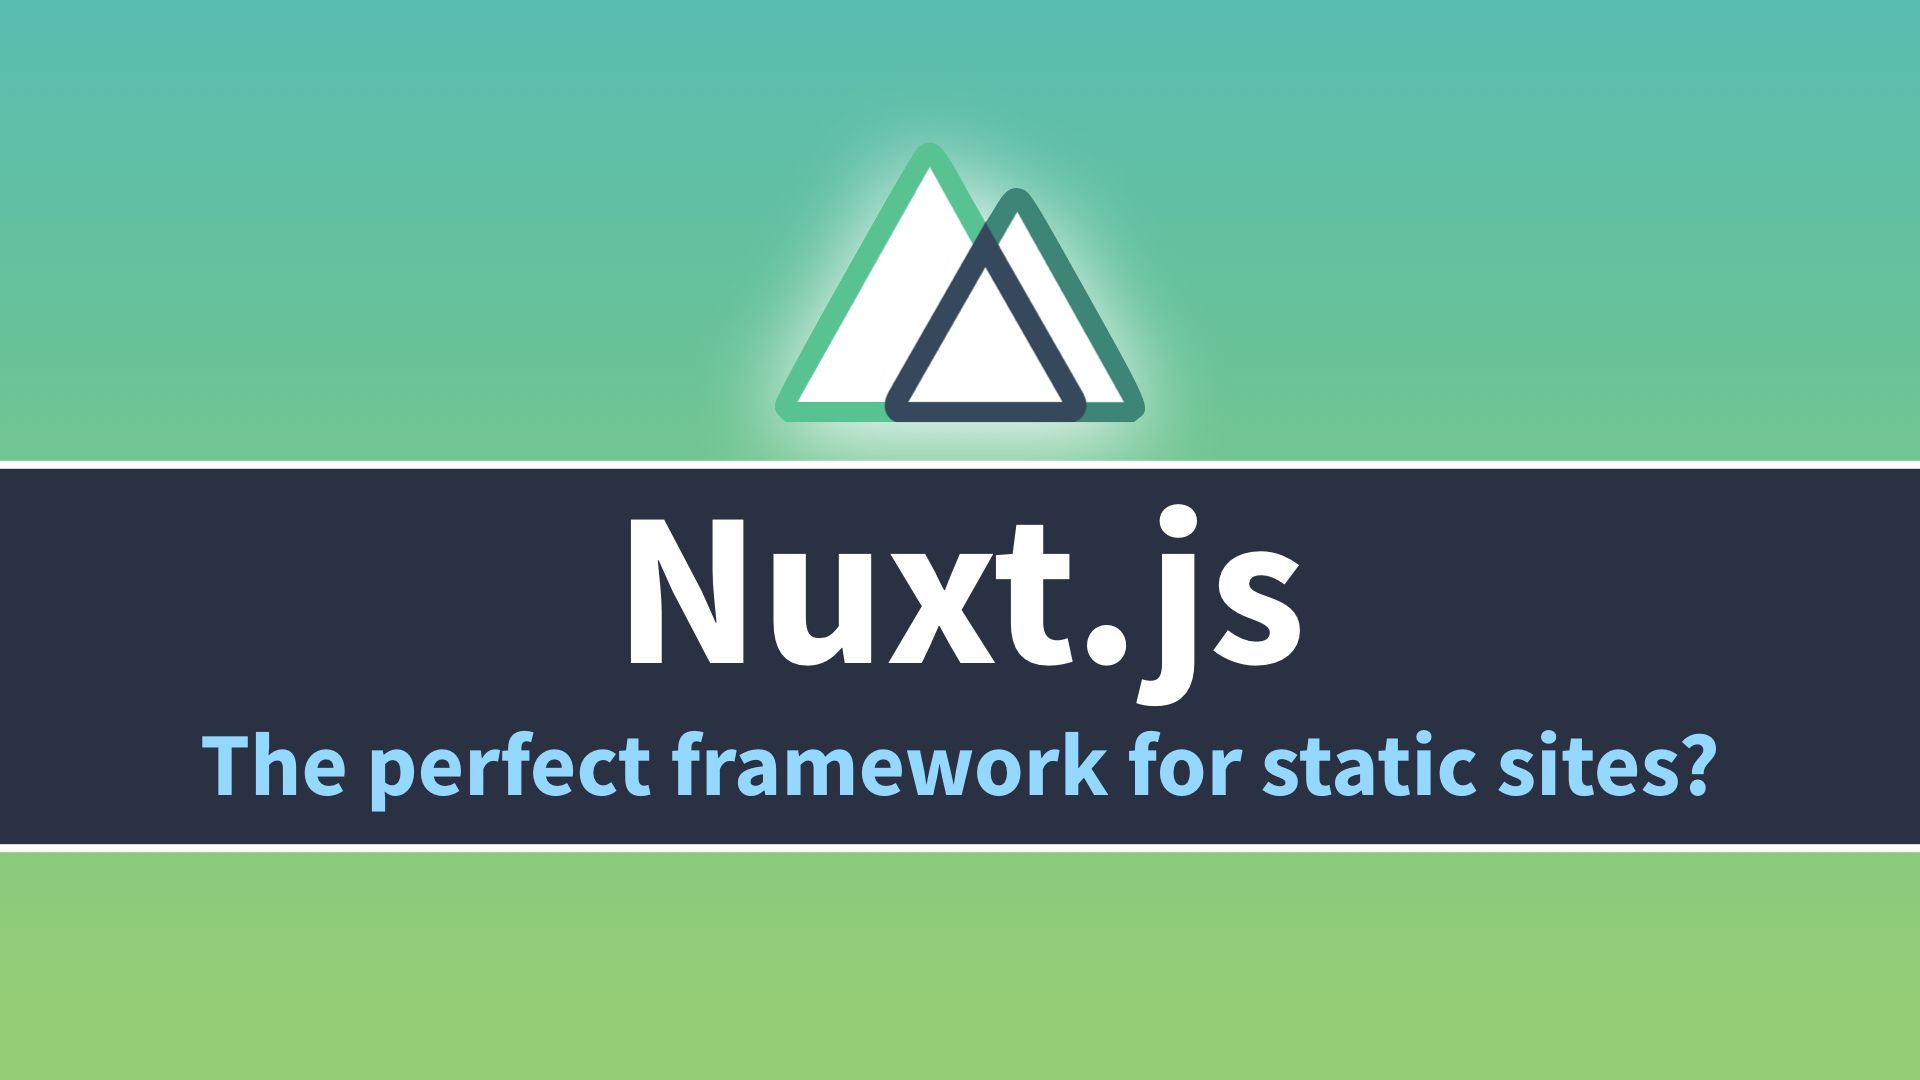 Why Nuxt.js is the perfect framework for building static websites